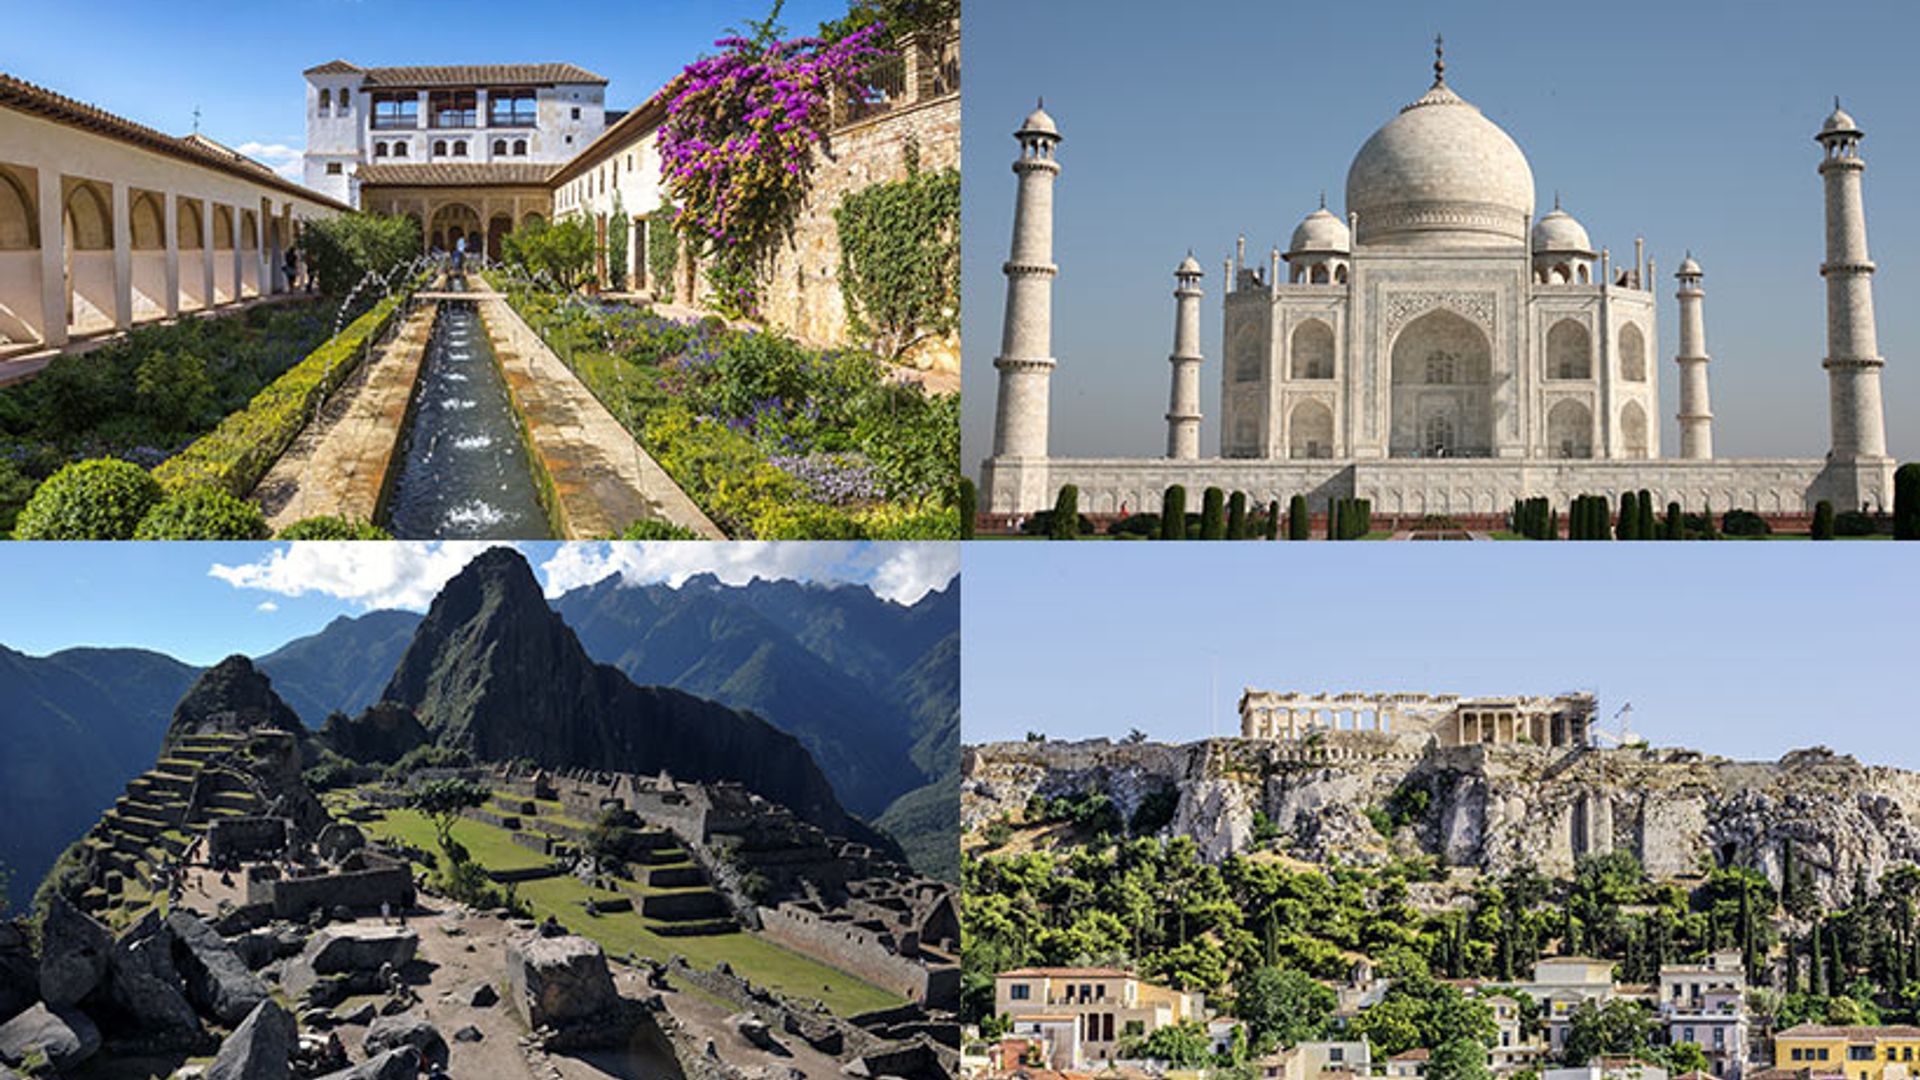 The 10 most popular destinations for picture-perfect Instagram snaps